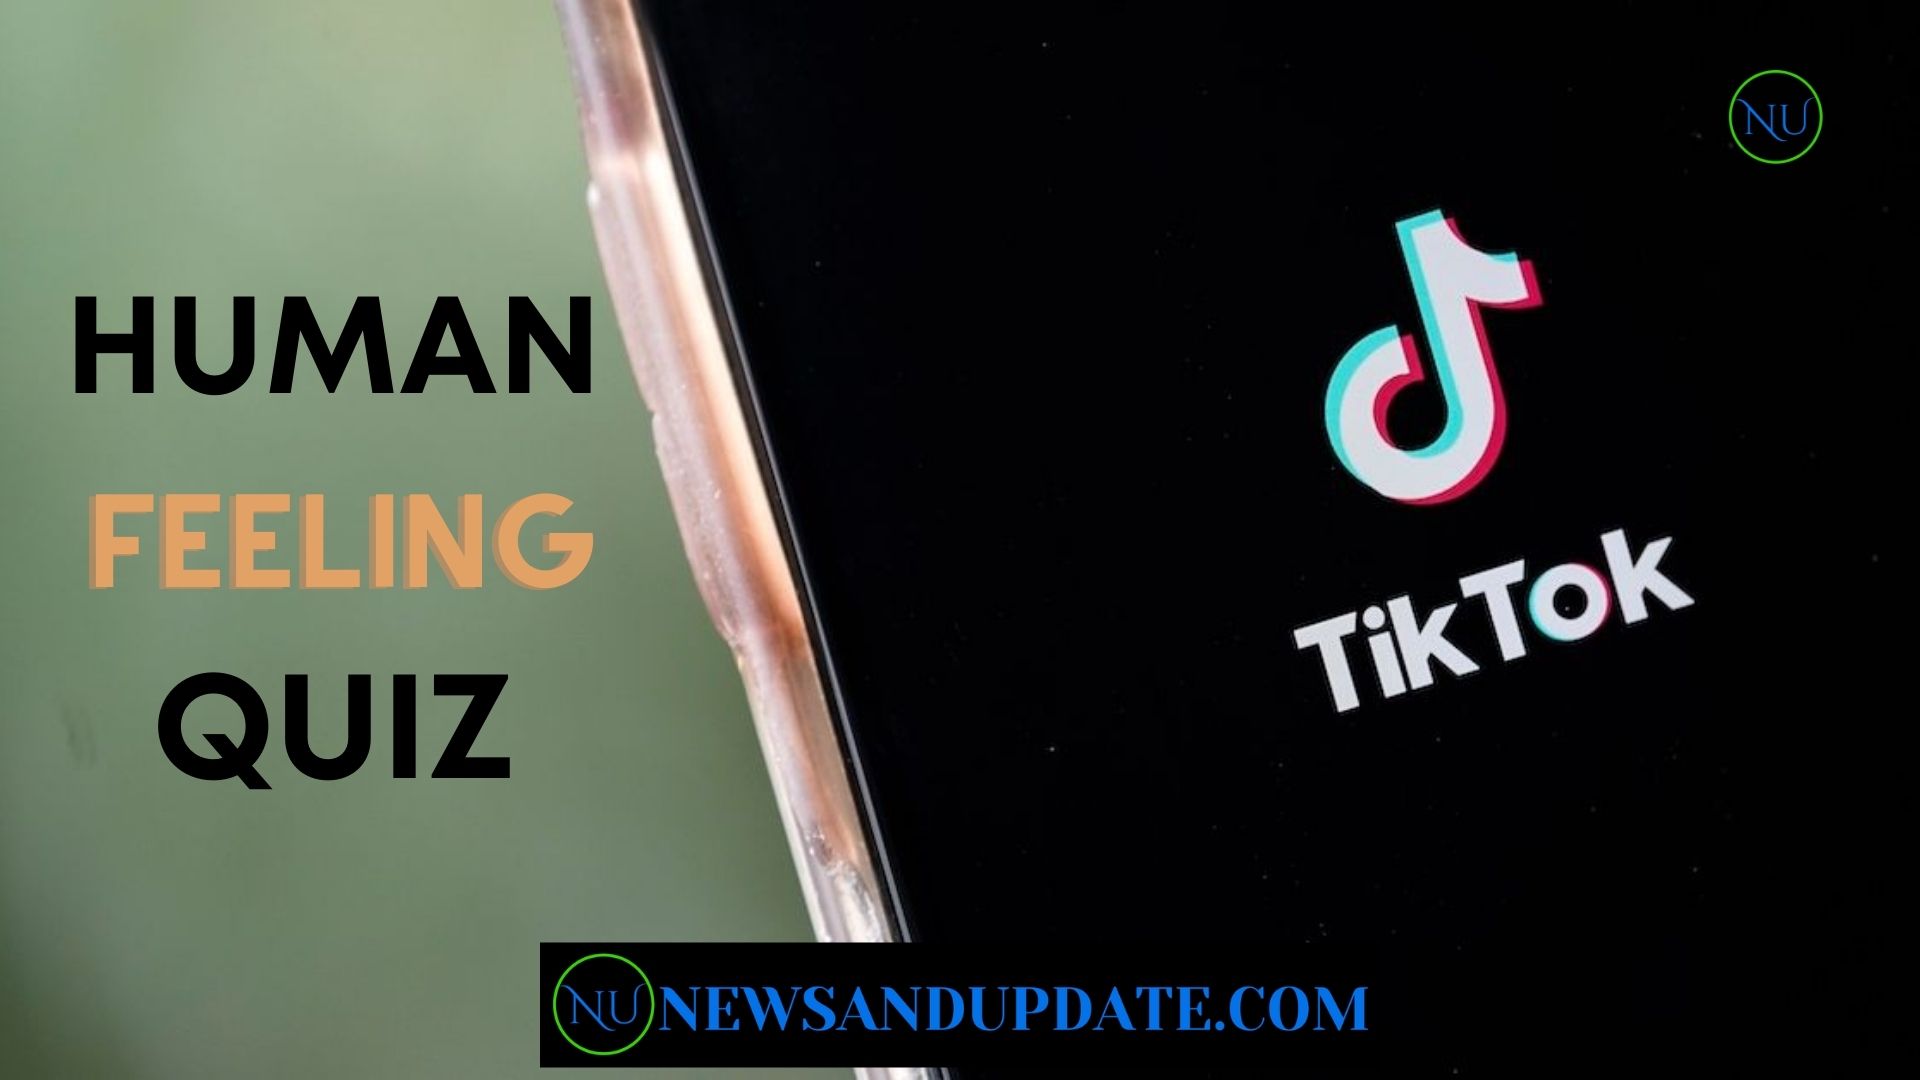 TikTok's Human Feeling Quiz - Know Everything About This Trend!